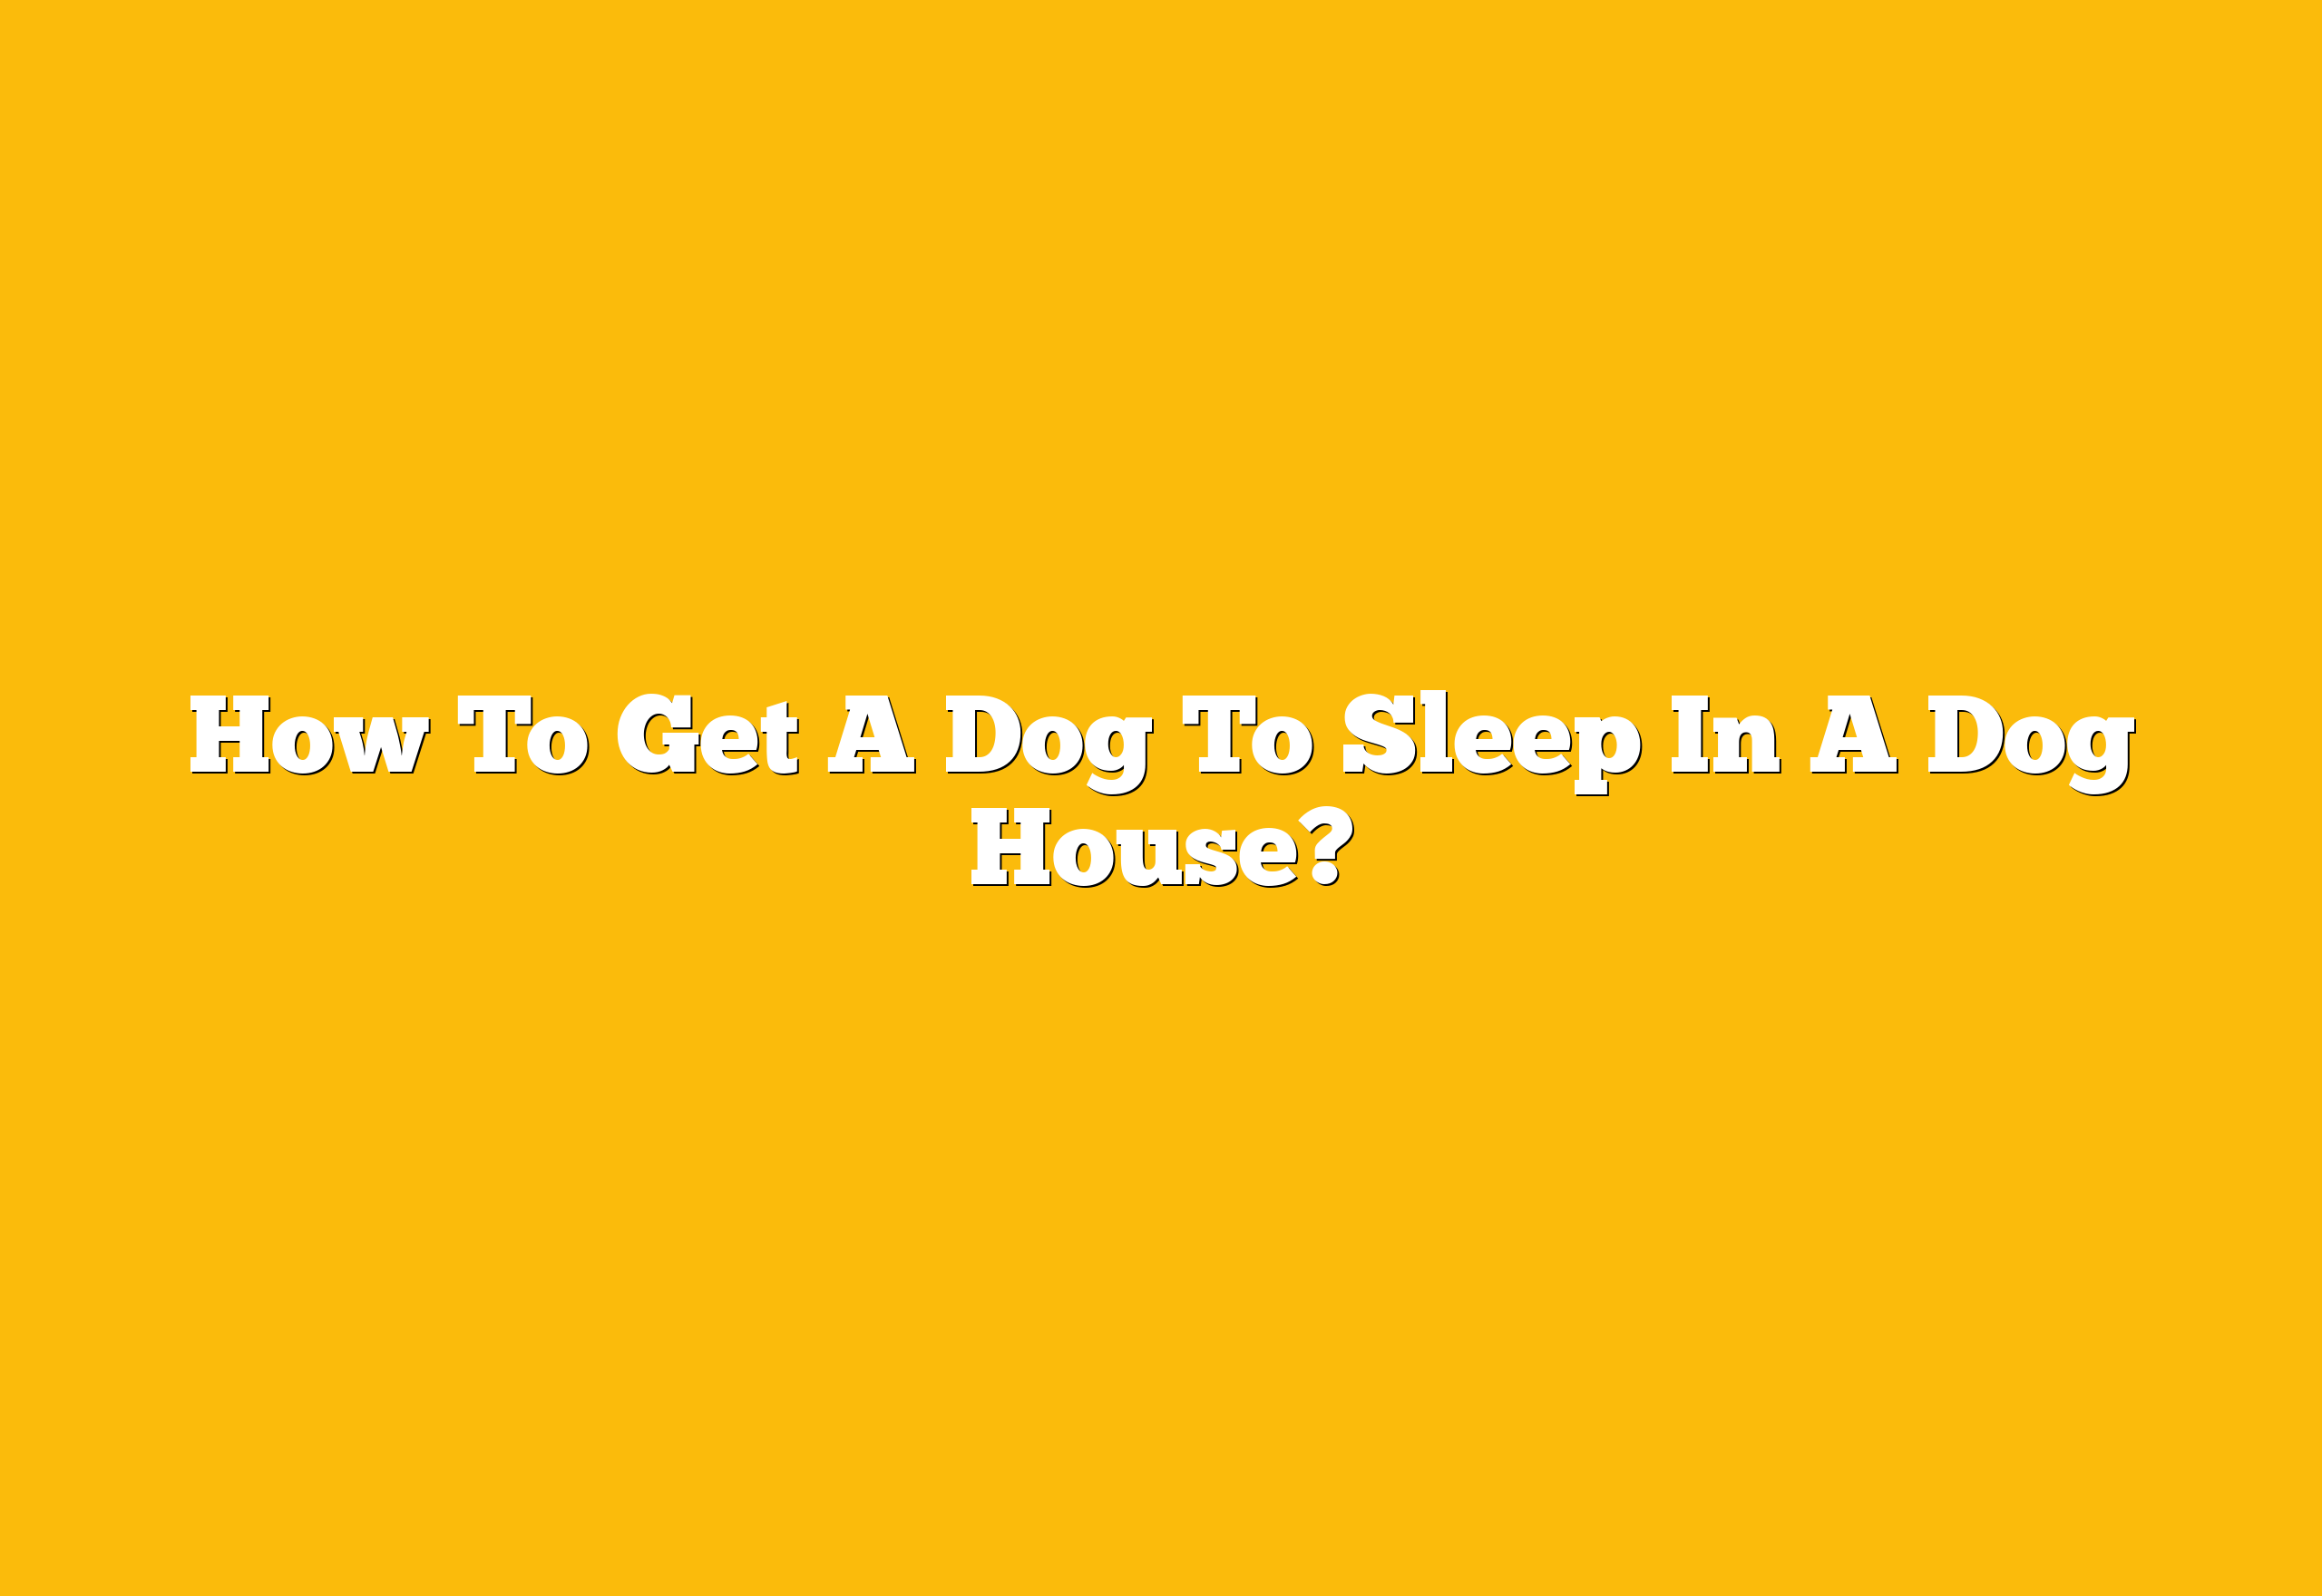 How To Get A Dog To Sleep In A Dog House?